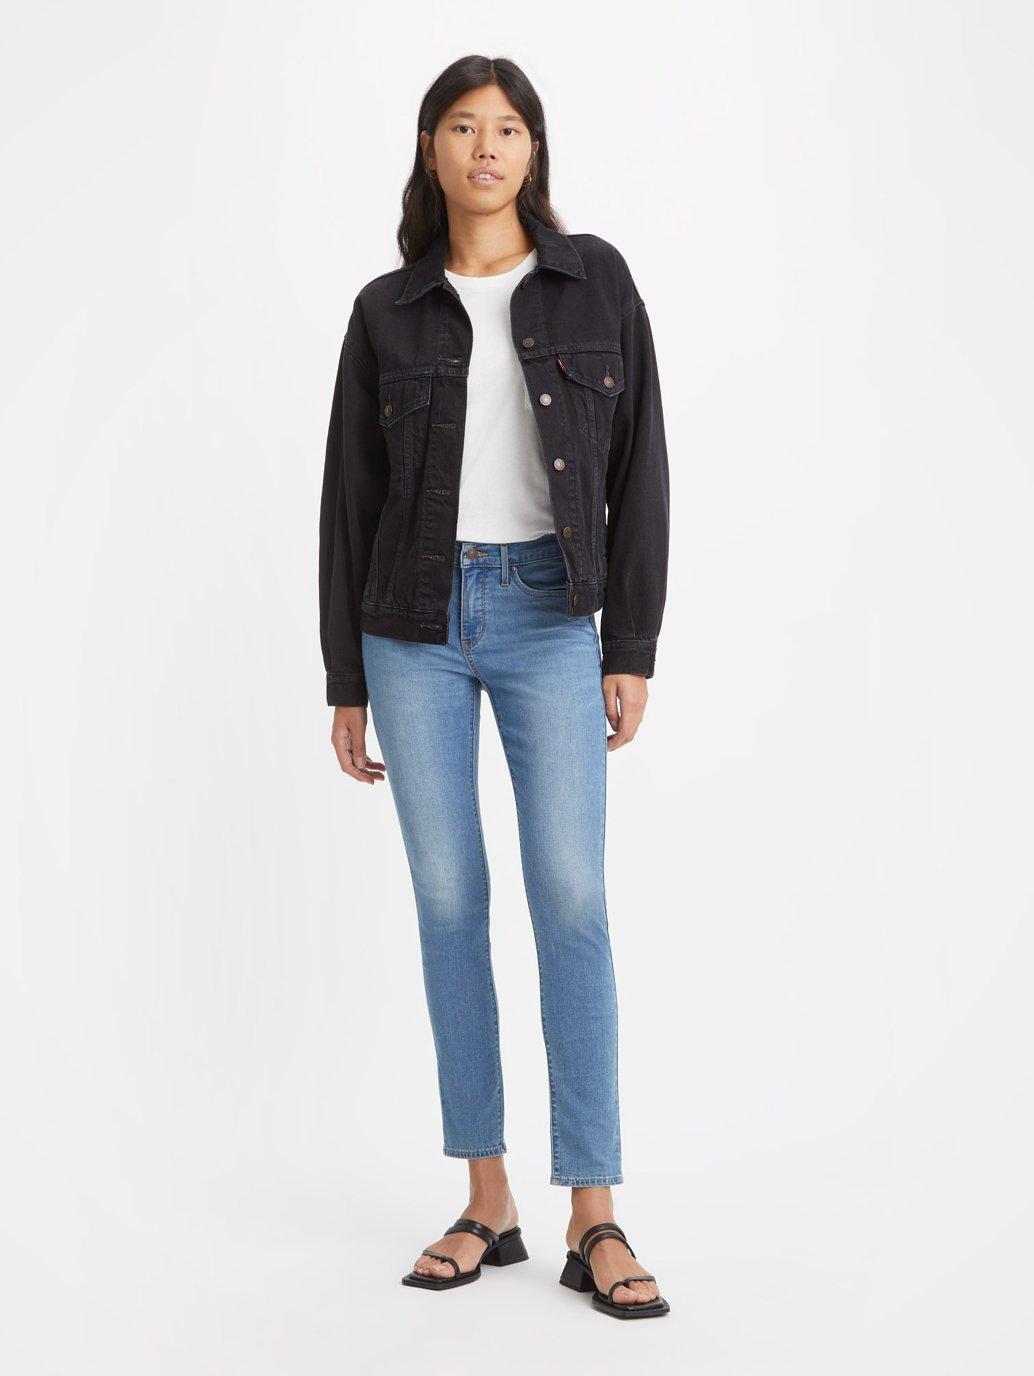 Buy Levi's® Women's 311 Shaping Skinny Jeans | Levi's® Official Online  Store SG